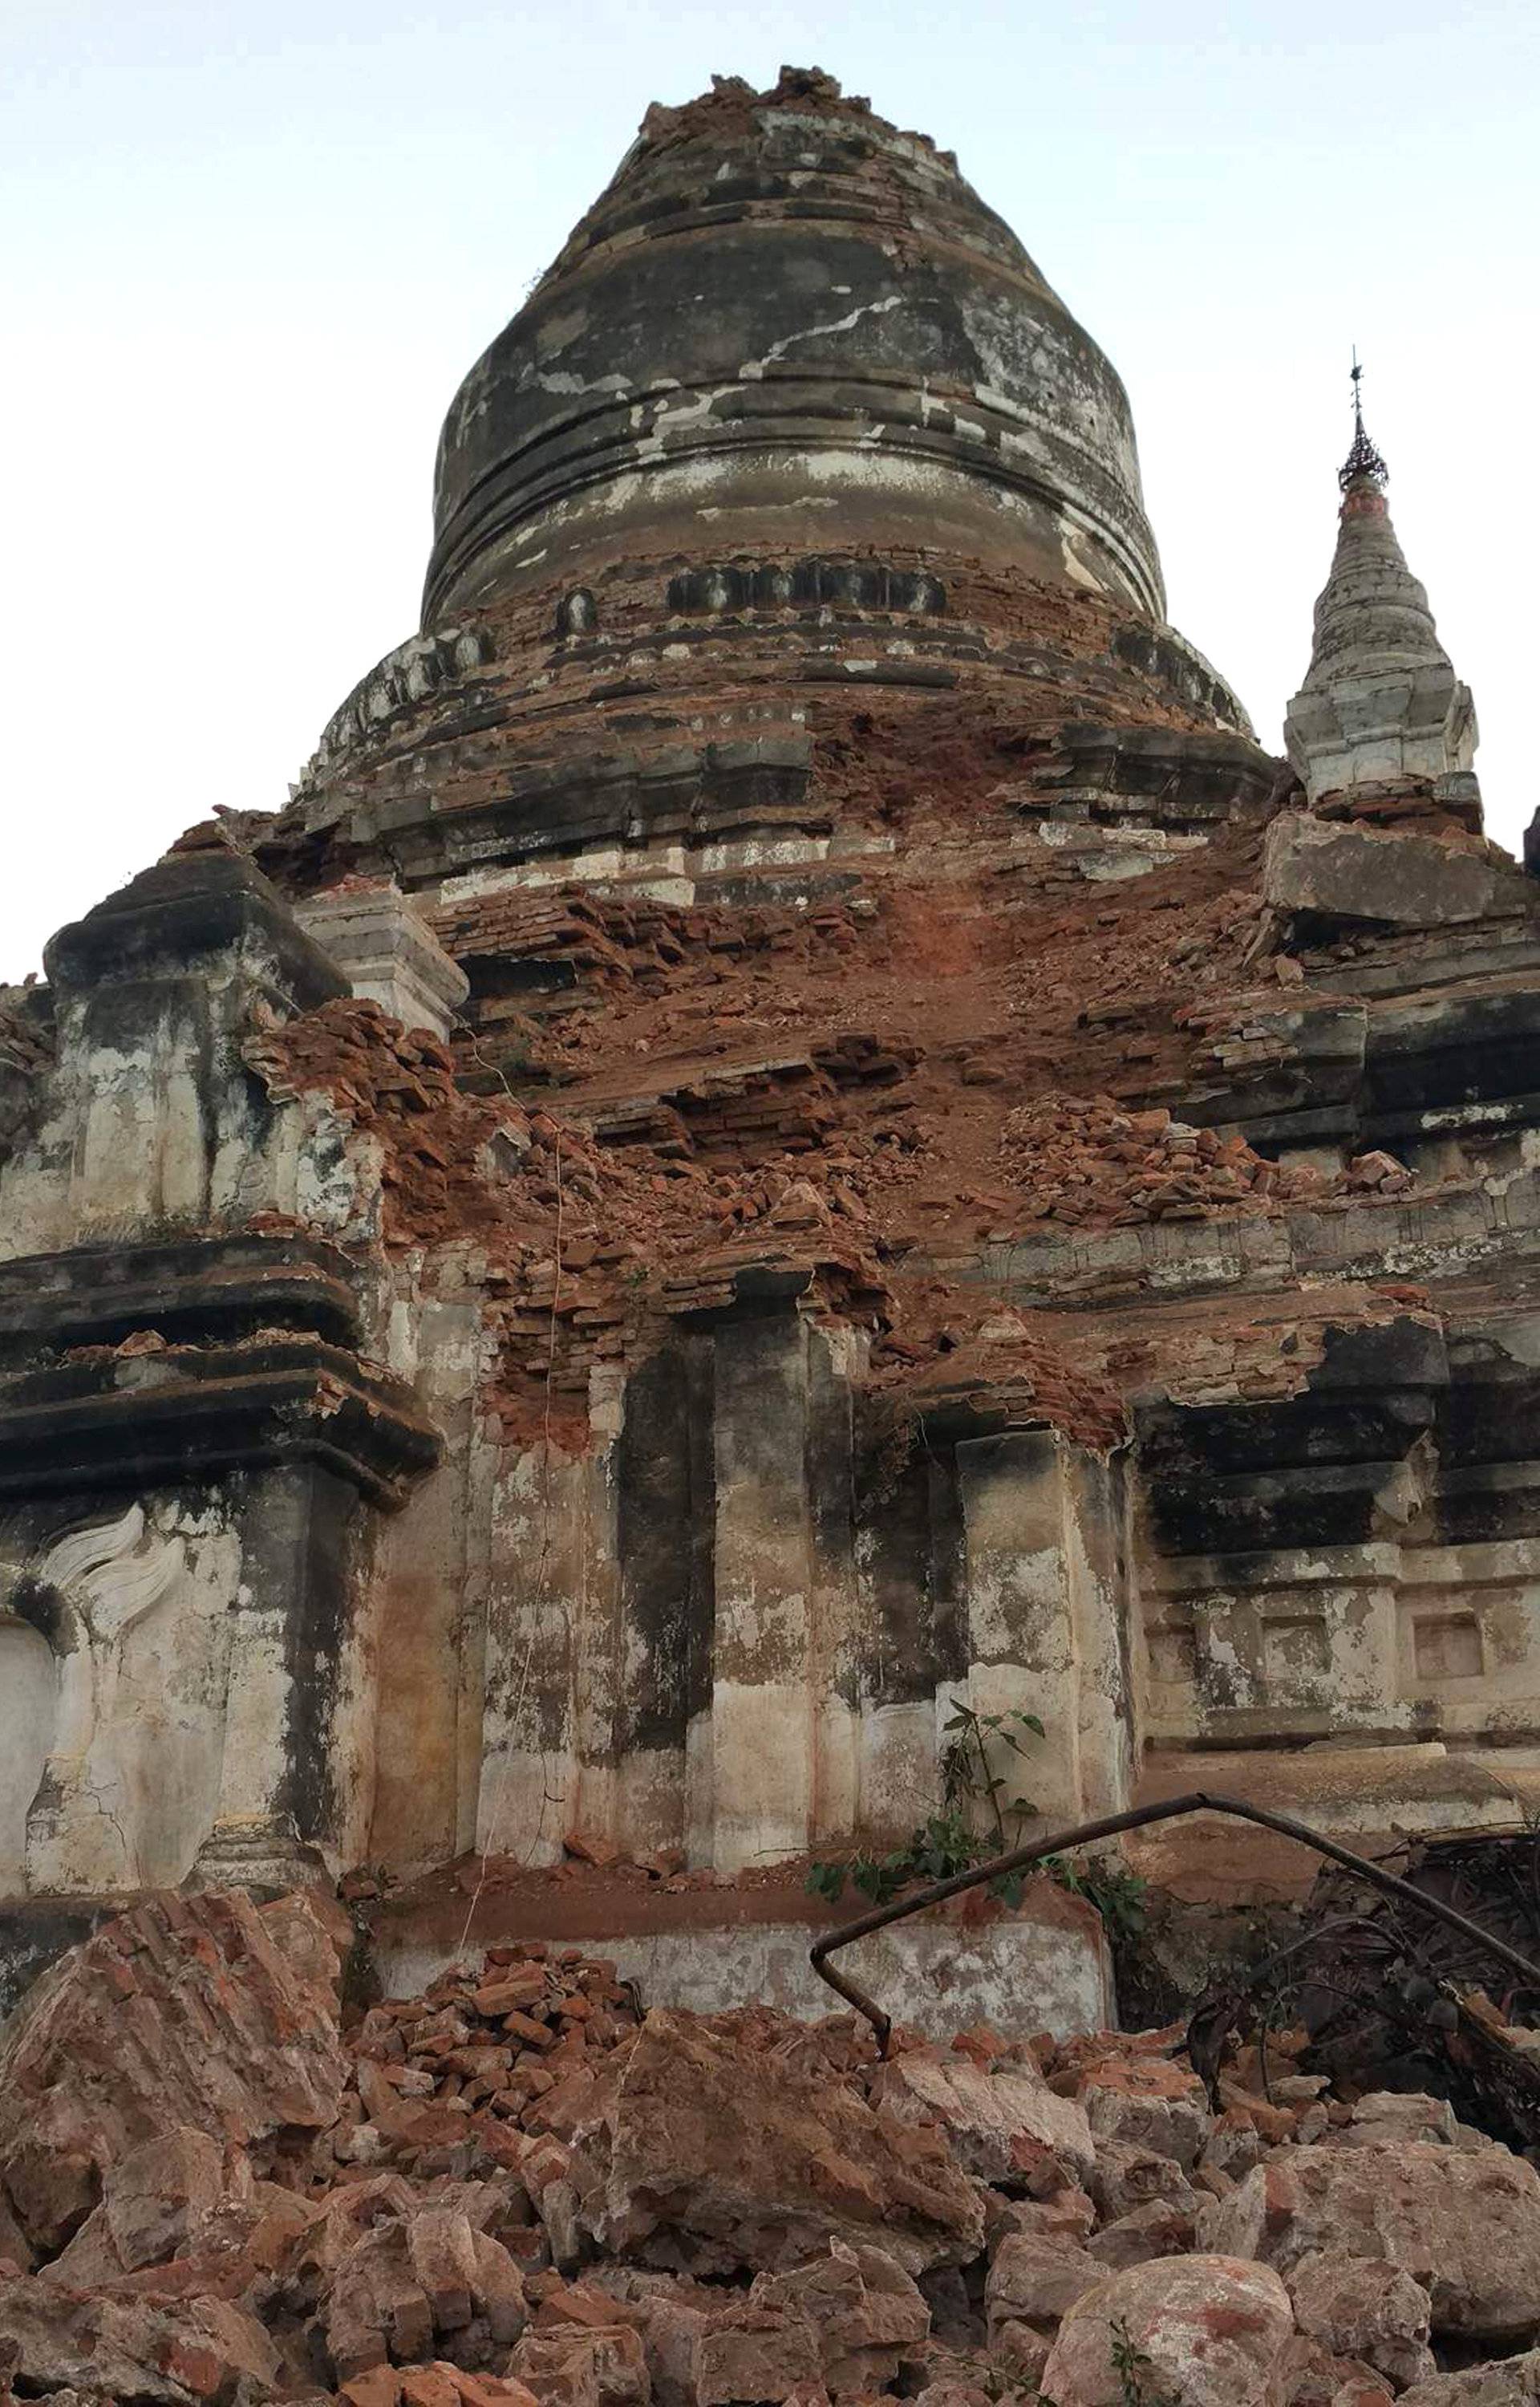 A damaged pagoda is seen after an earthquake in Bagan